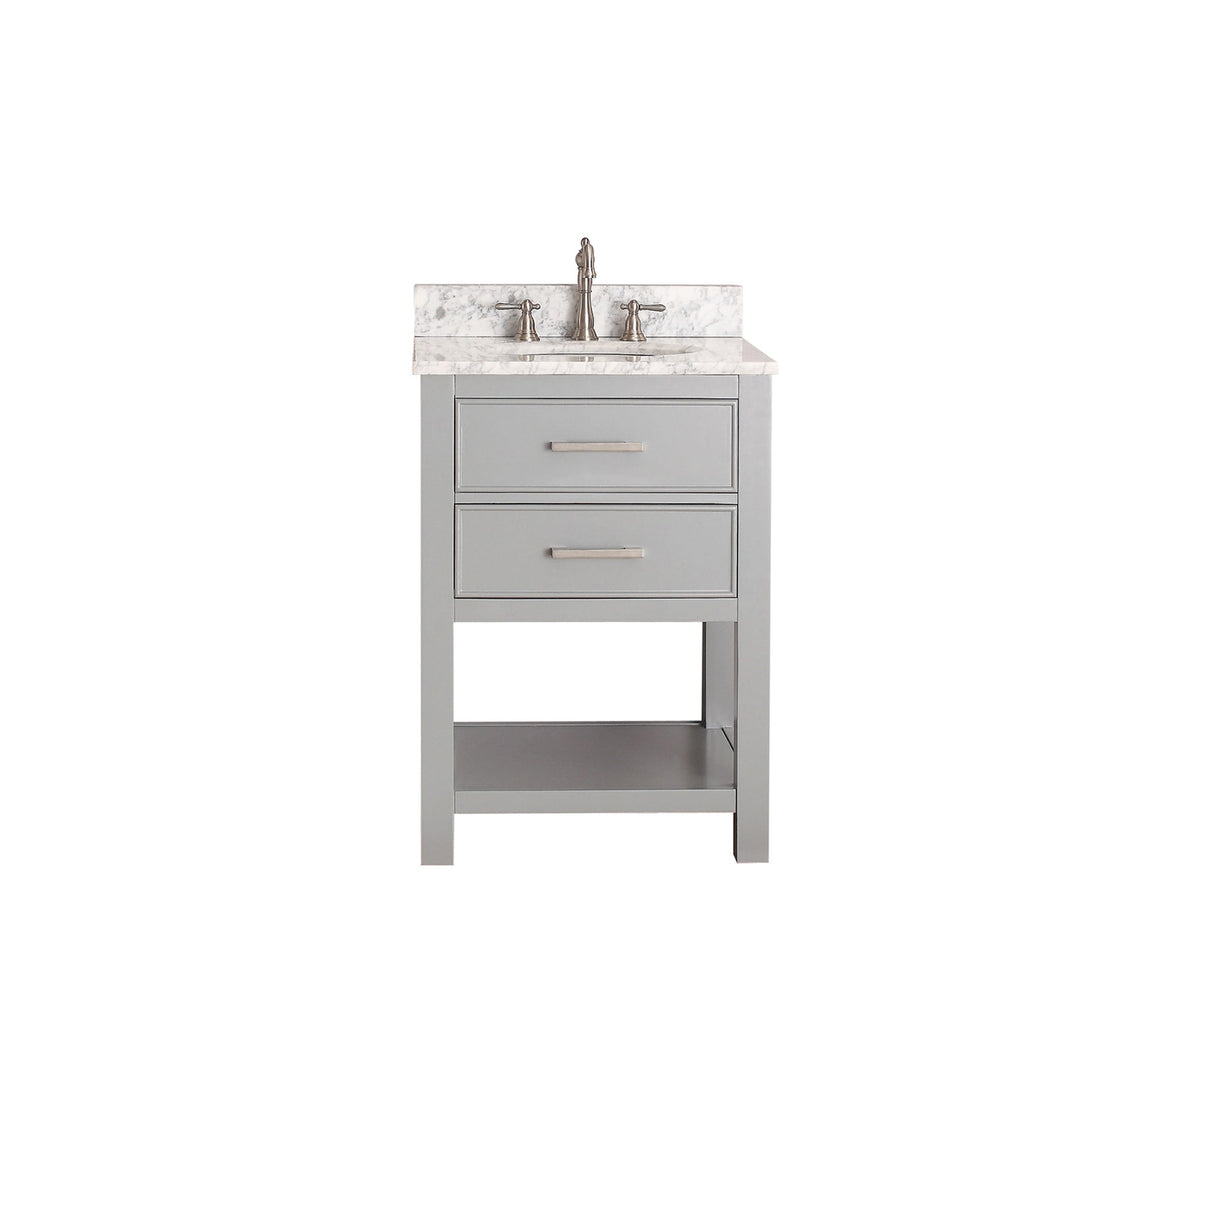 Avanity Brooks 25 in. Vanity in Chilled Gray finish with Carrara White Marble Top